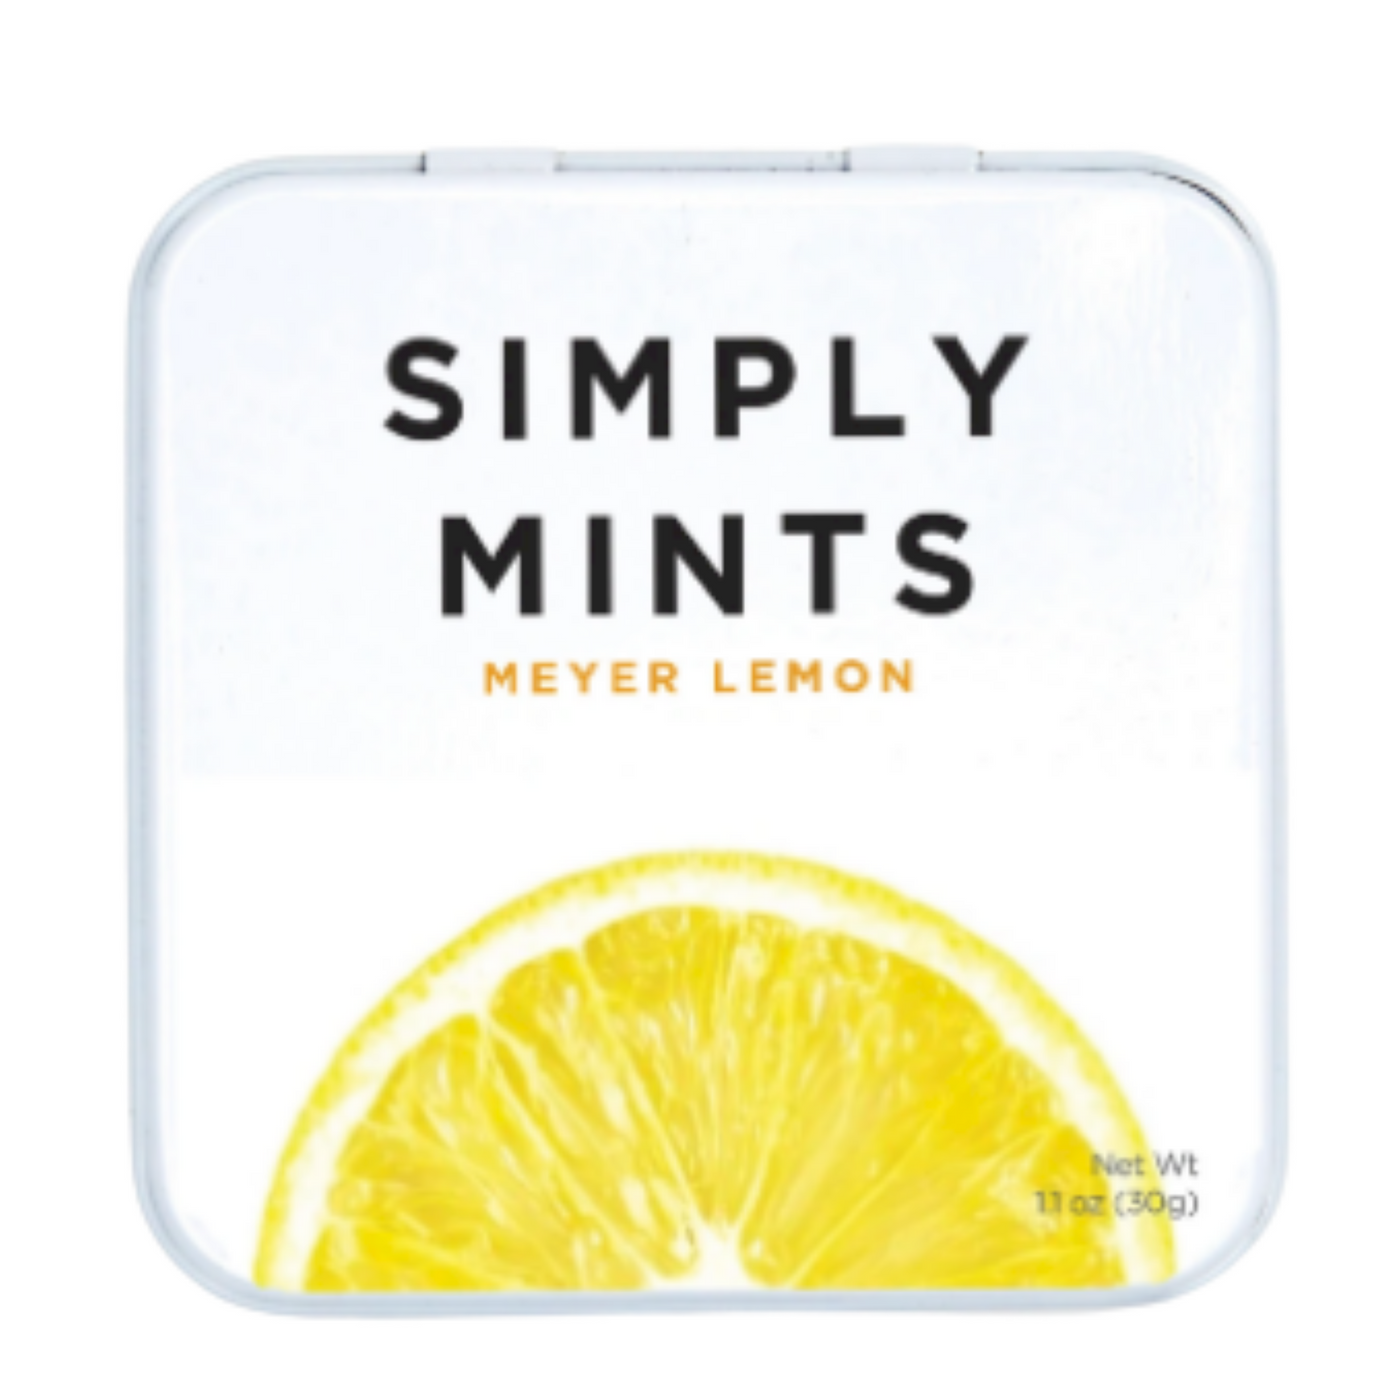 Meyer Lemon Simply Mints For Happiness  Wicked Good Gift Box